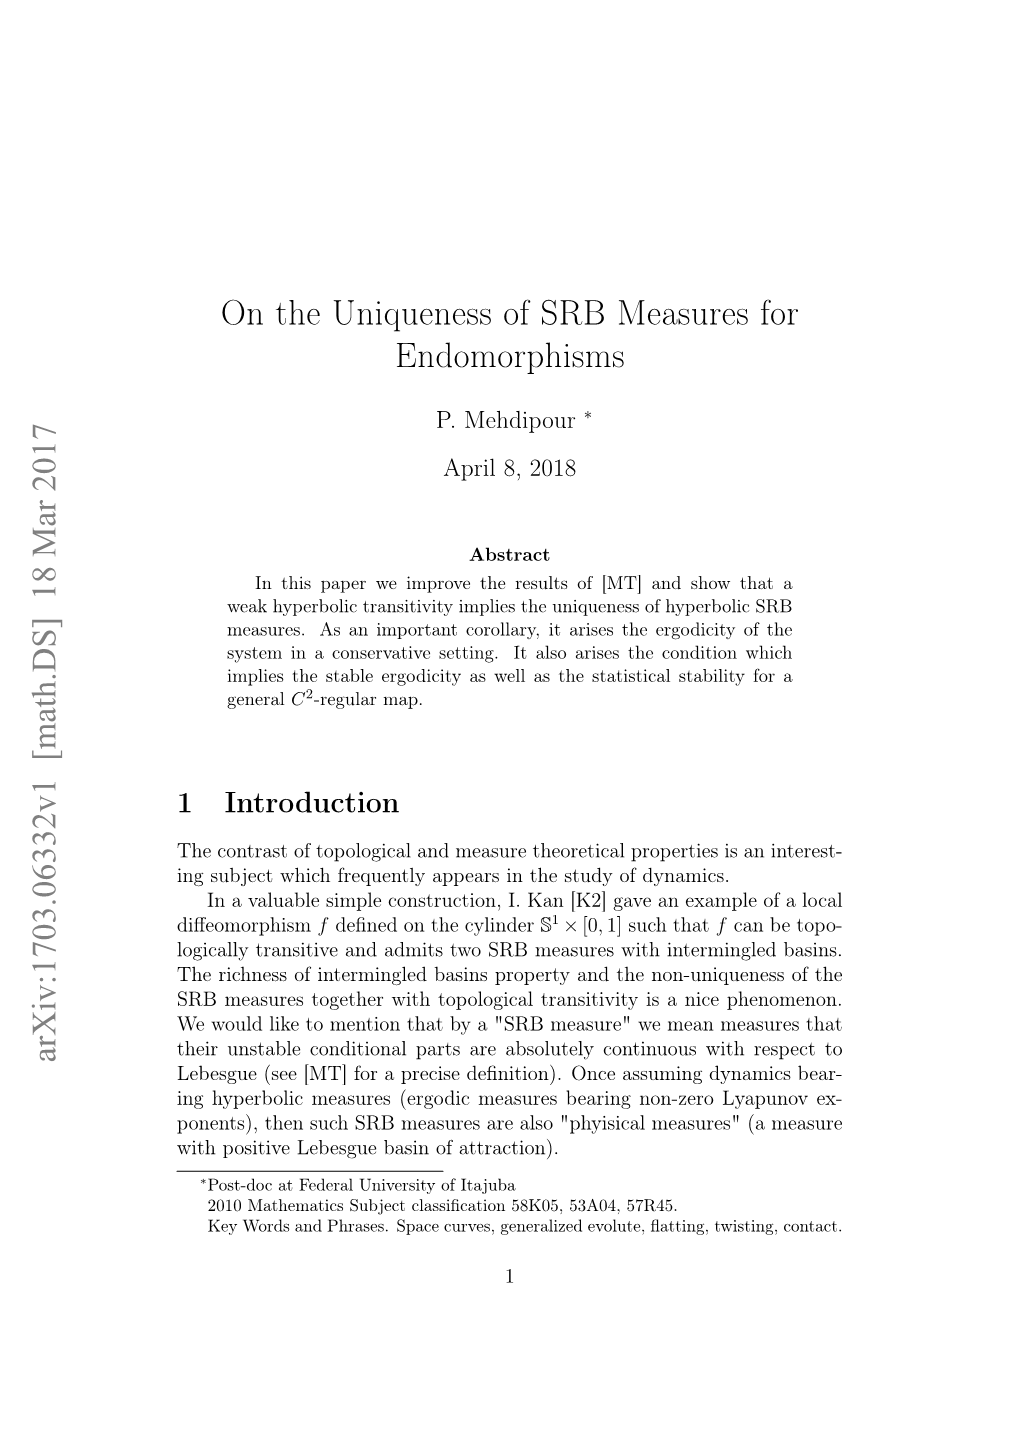 On the Uniqueness of SRB Measures for Endomorphisms Arxiv